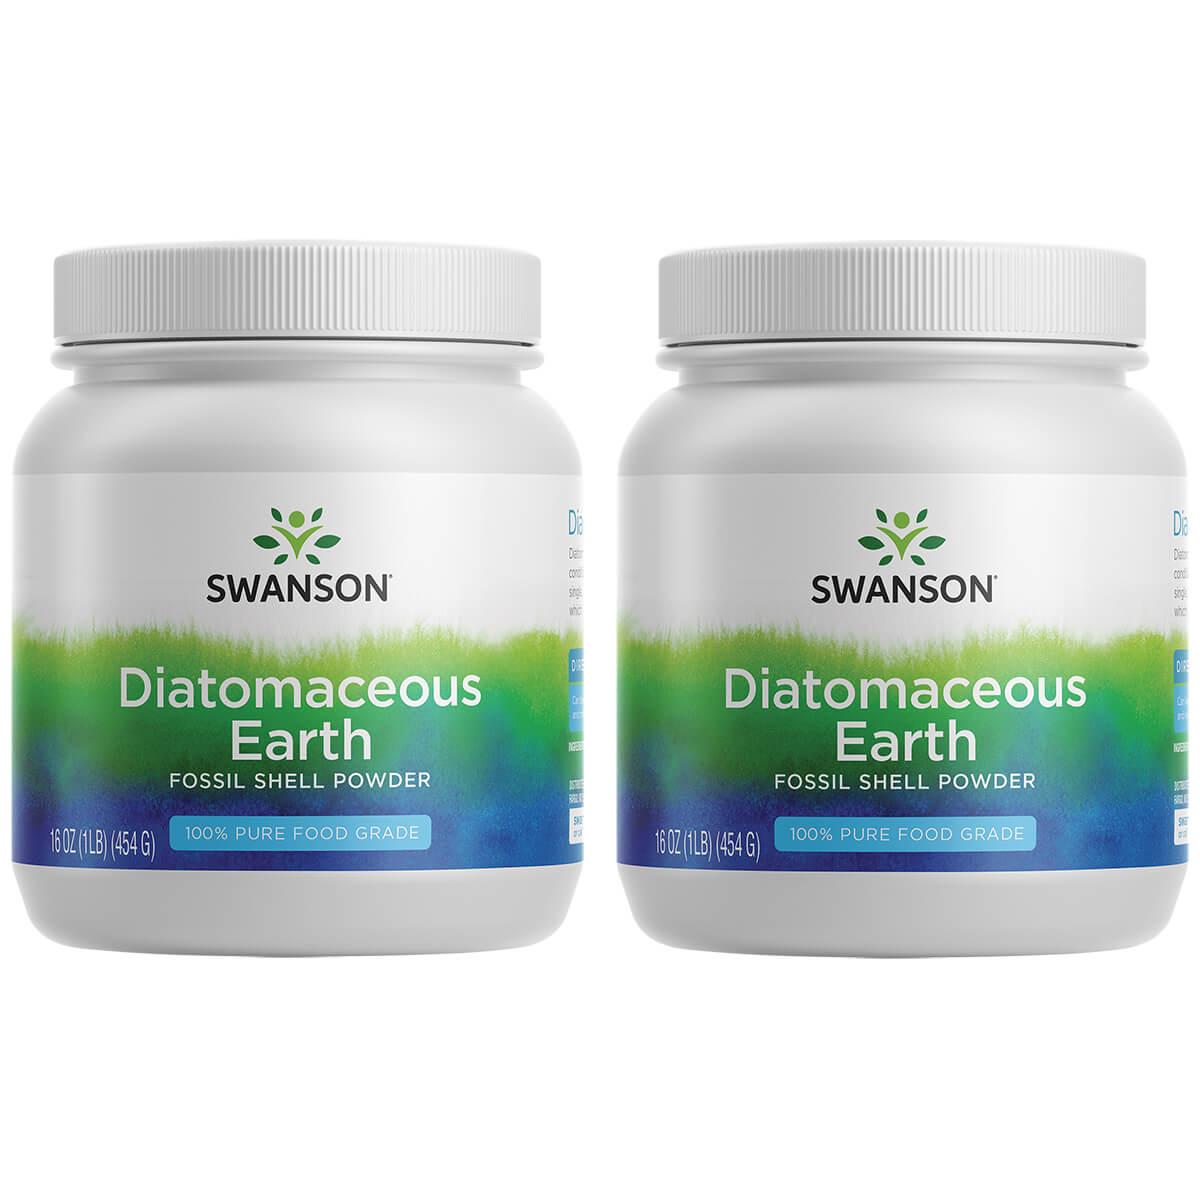 Swanson Healthy Home Diatomaceous Earth Fossil Shell Powder - 100% Pure Food Grade 2 Pack 16 oz Powder